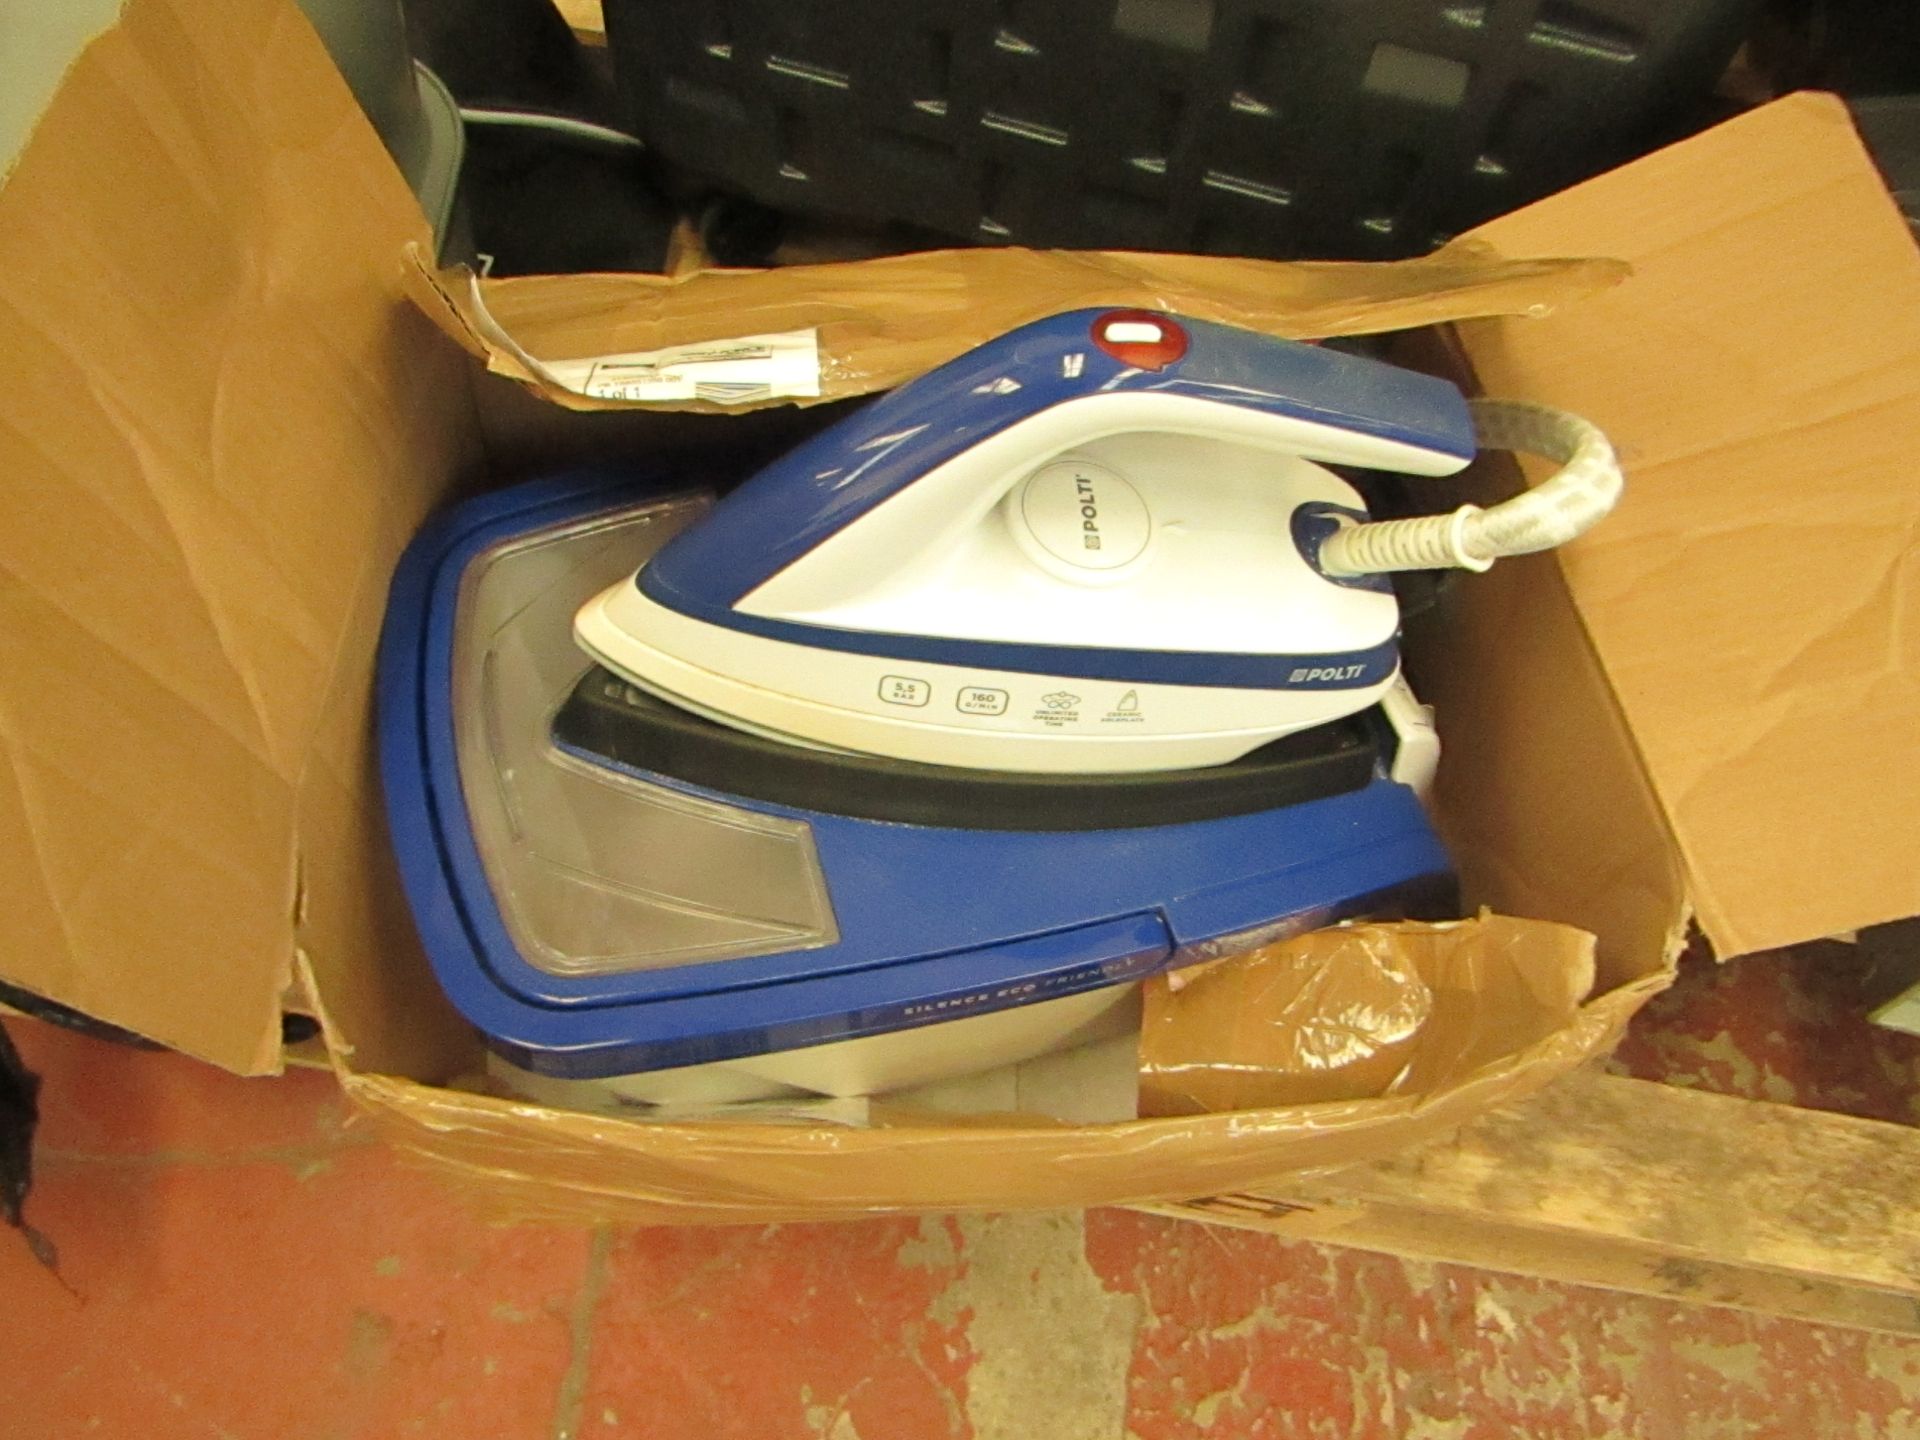 Polti Violetti steam generator iron, powers on and heats up.